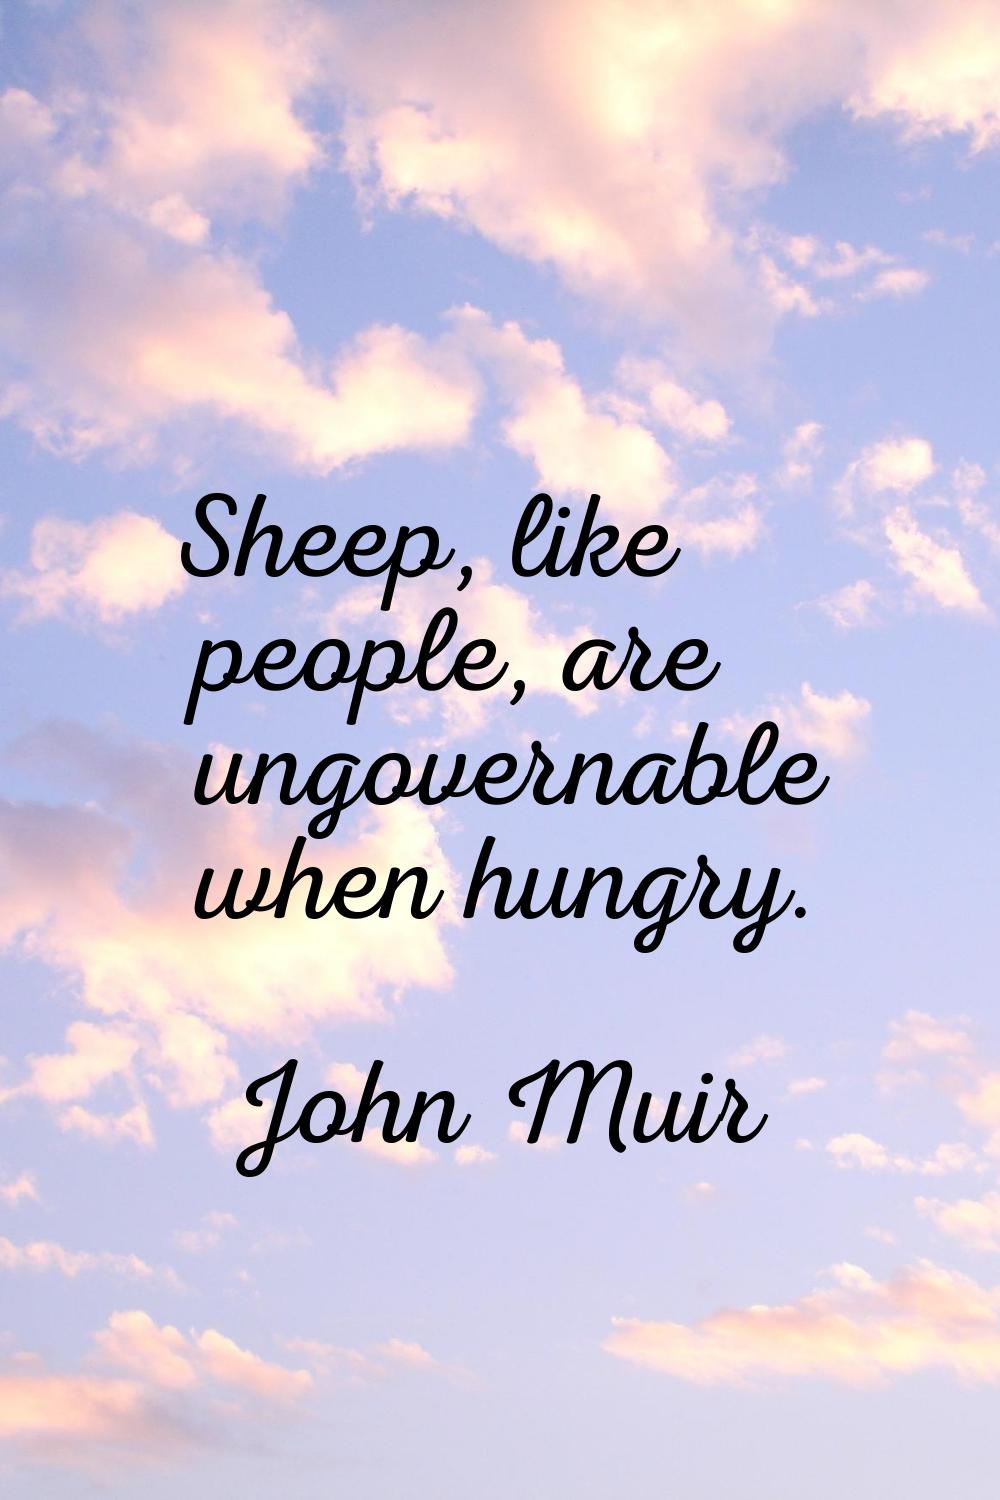 Sheep, like people, are ungovernable when hungry.